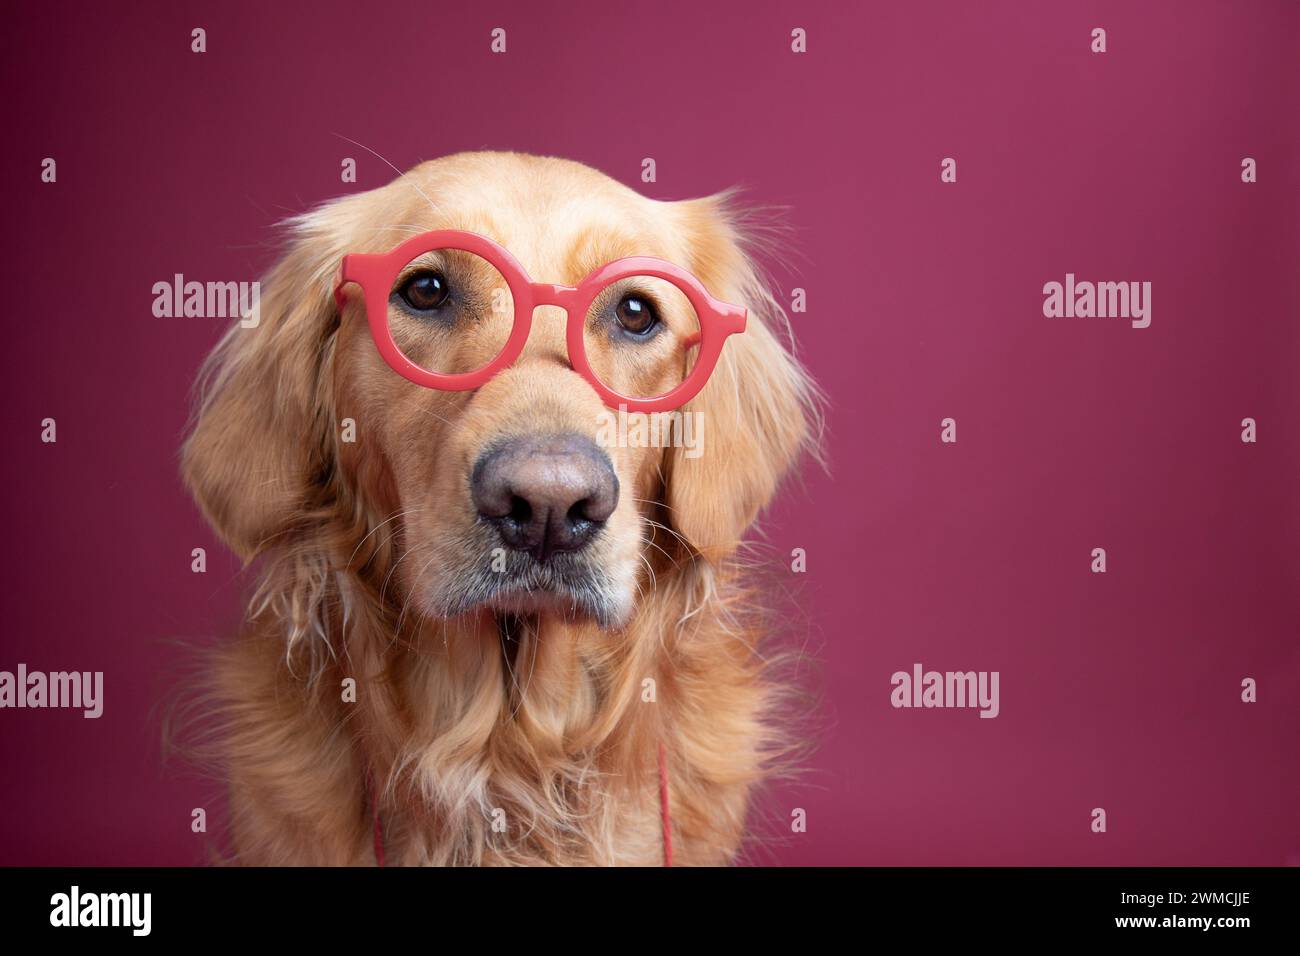 Portrait of a  golden retriever wearing glasses against a red background Stock Photo